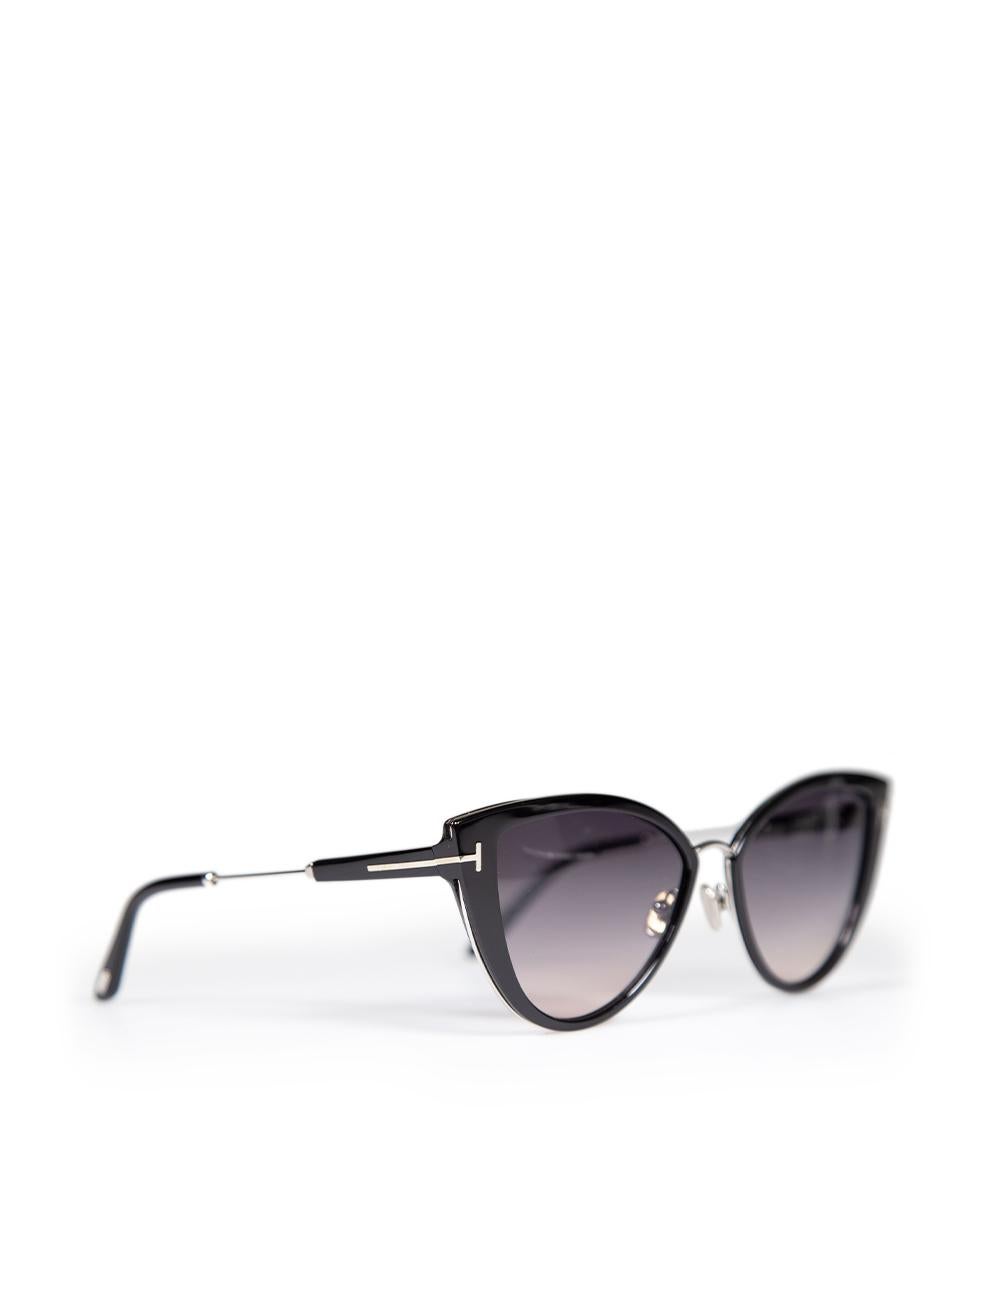 Tom Ford Shiny Black Anjelica Sunglasses In New Condition For Sale In London, GB